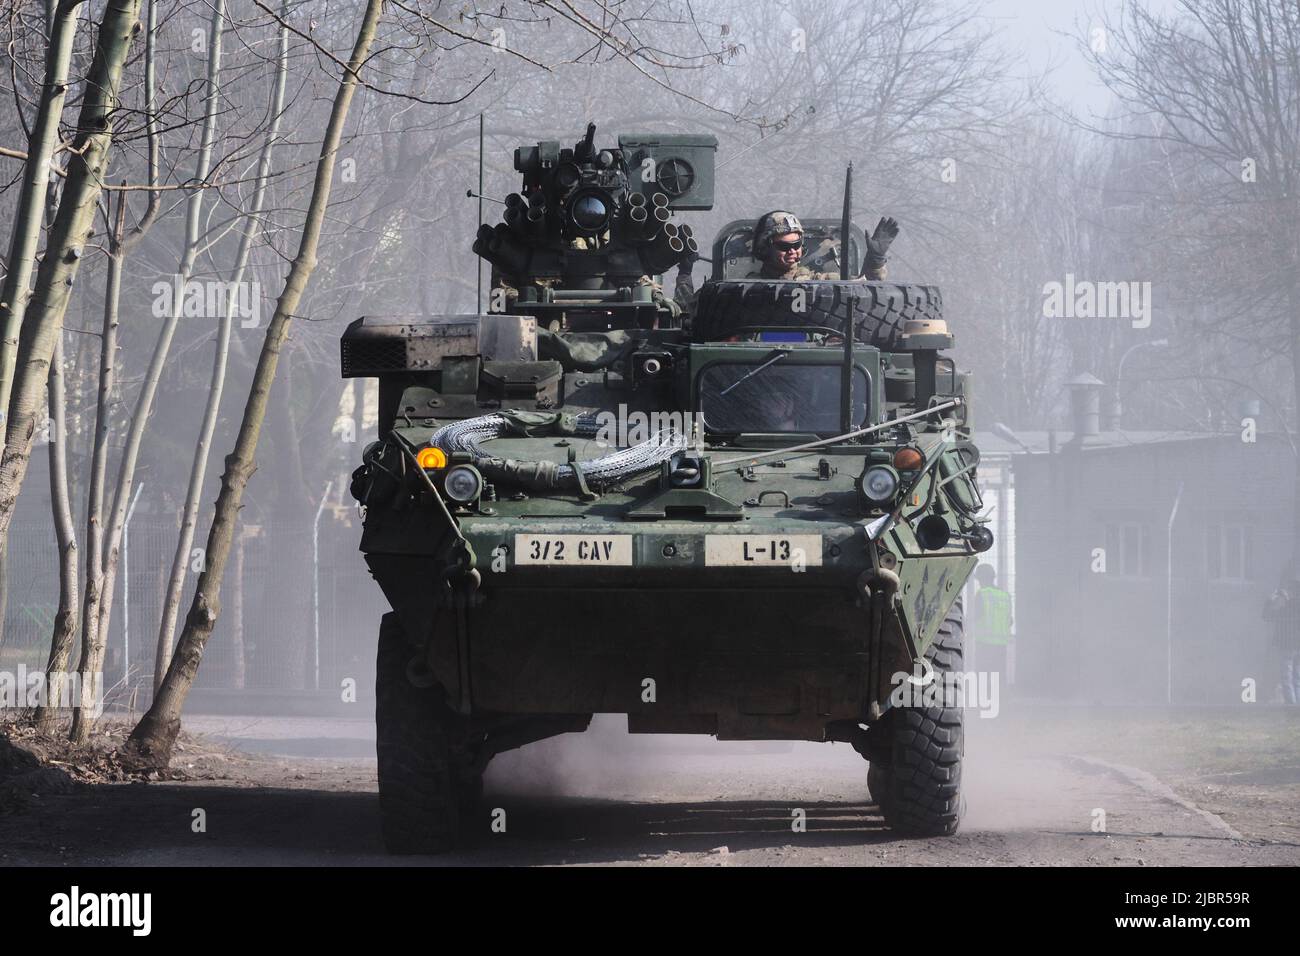 Lublin, Poland - March 25, 2015: United States Army vehicle (Armored Personnel Carrier) Stryker passing city streets Stock Photo